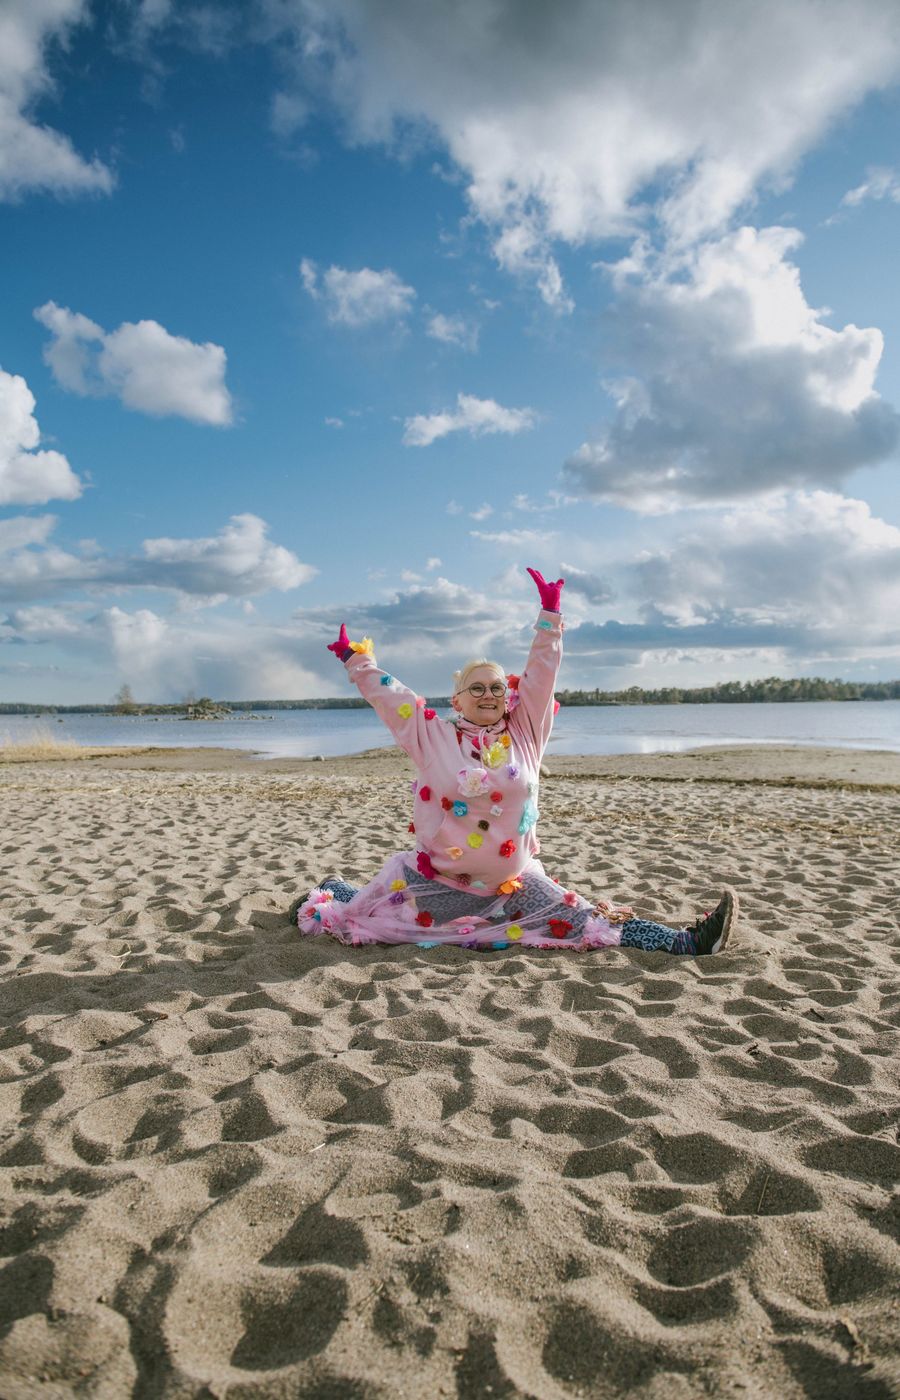 A blond woman in a pink suit making gymnastic movements on the beach